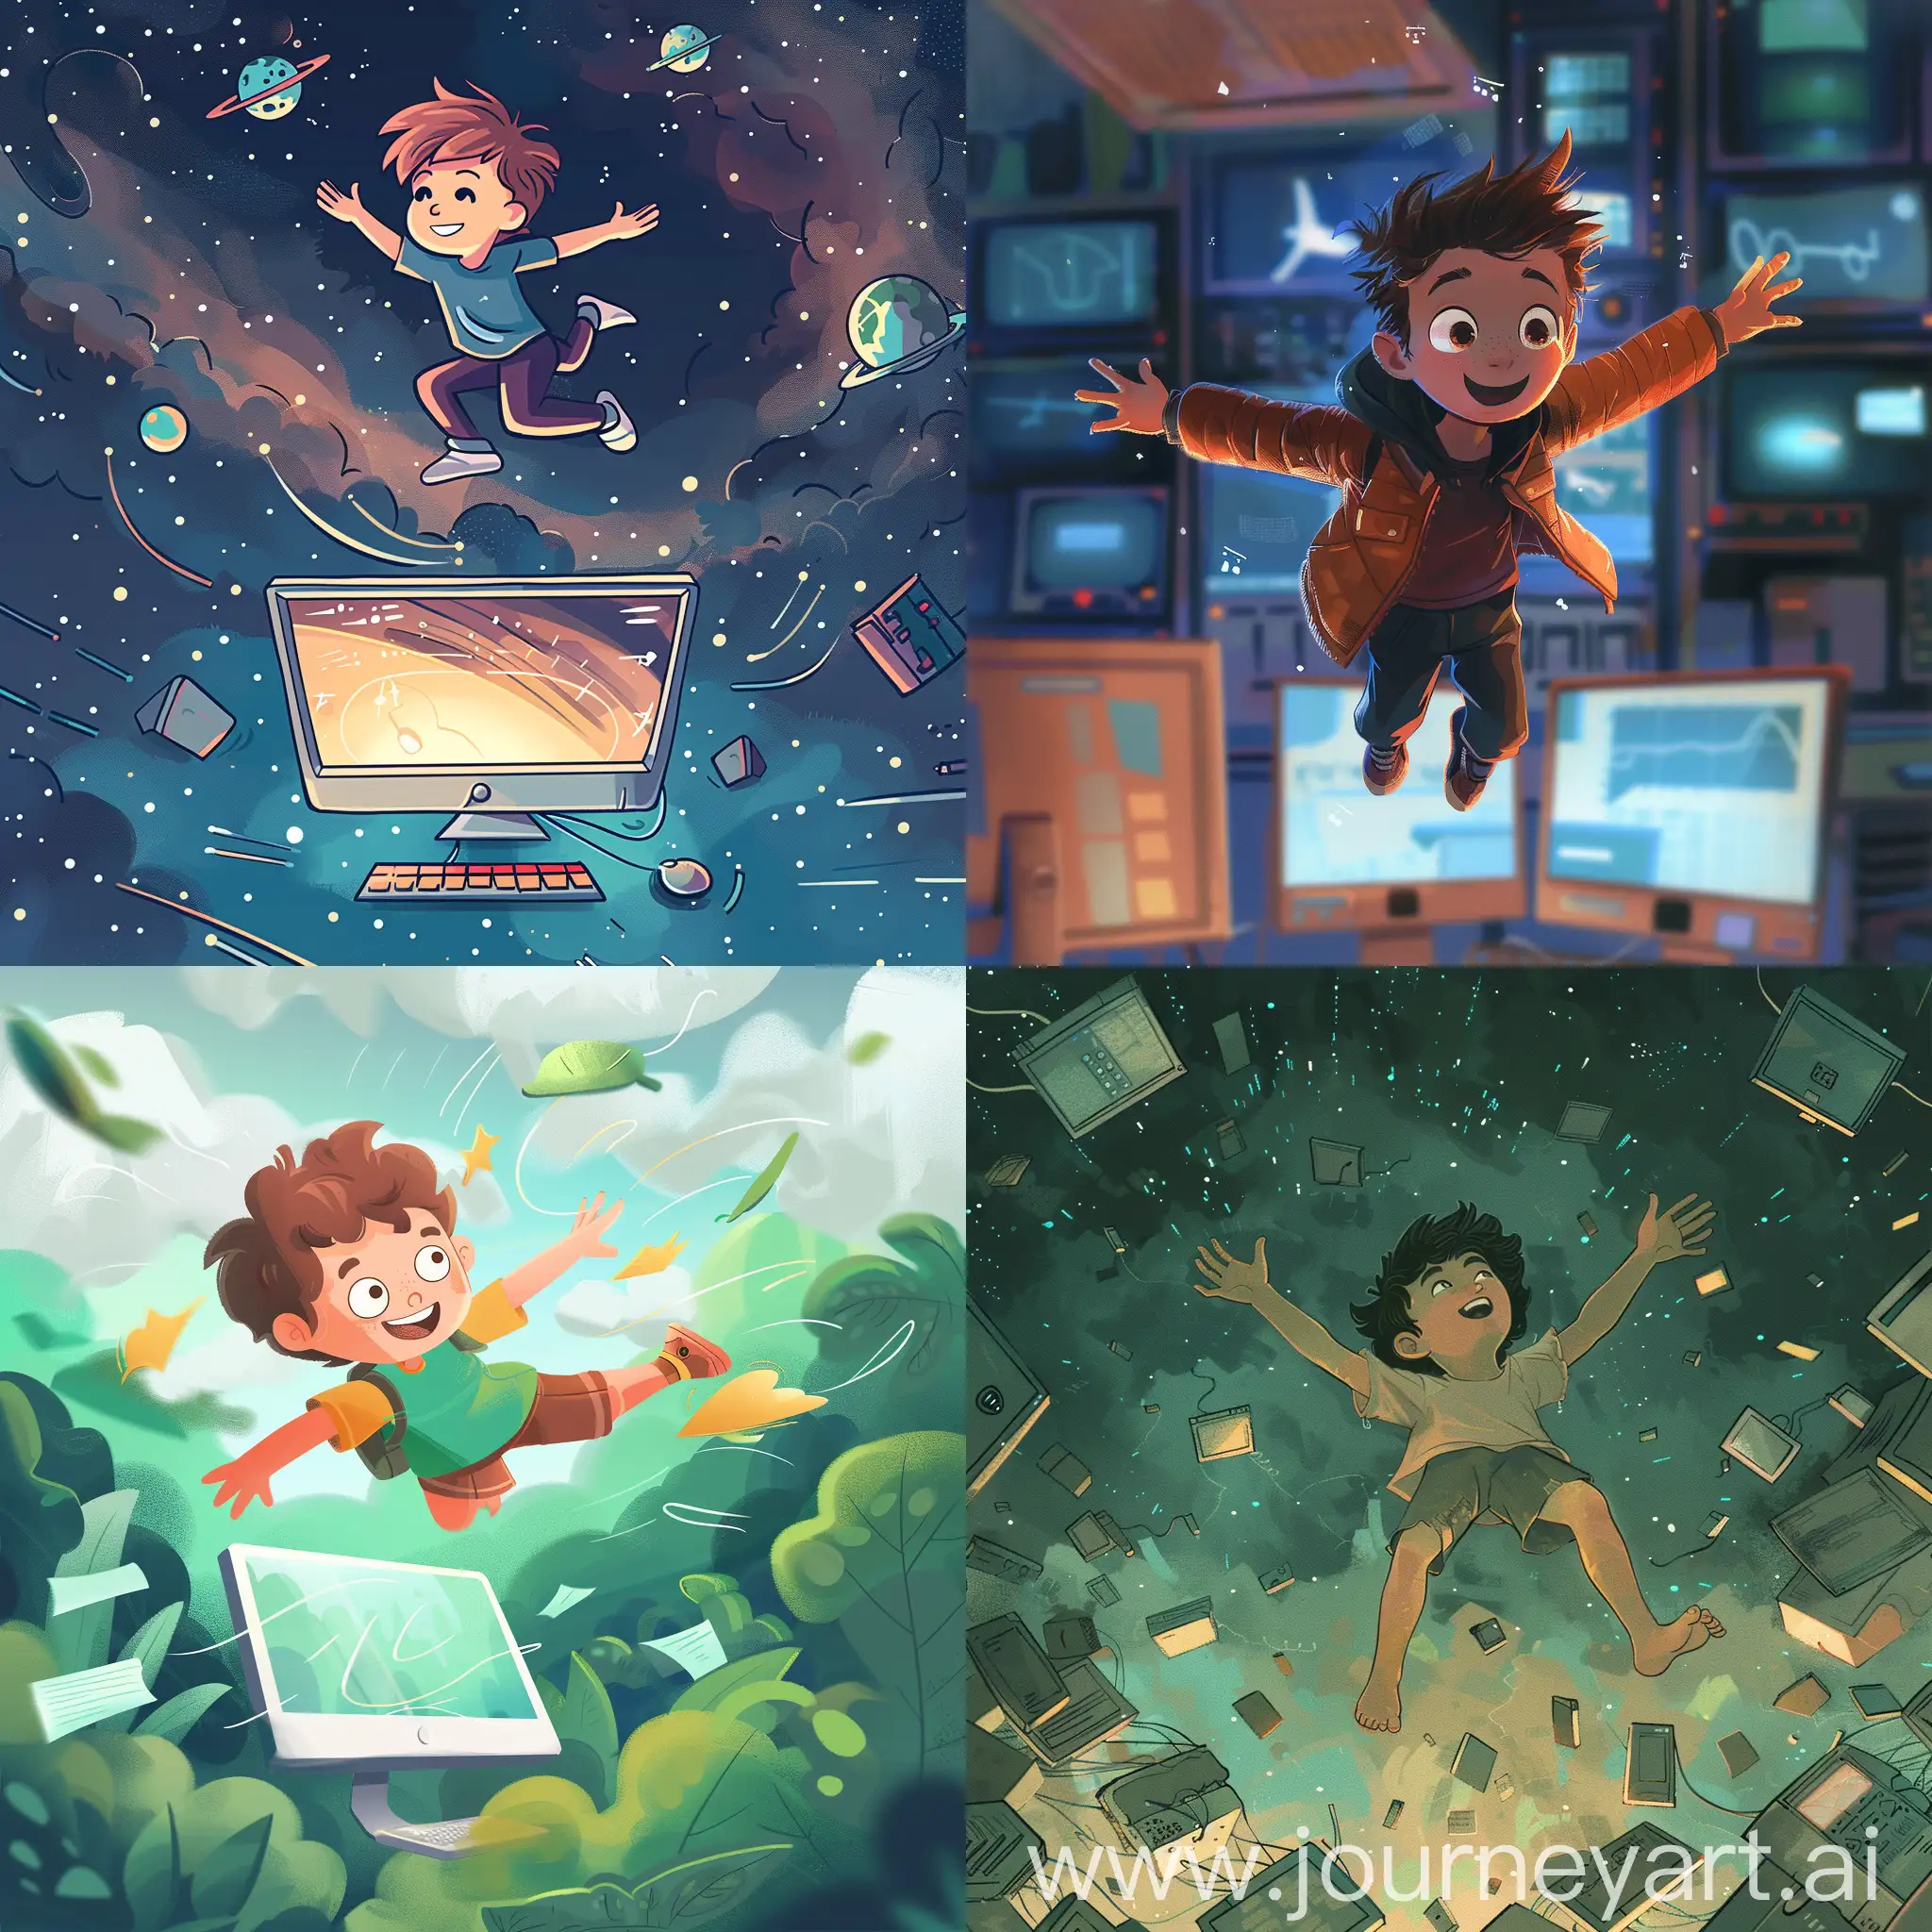 The boy is flying in a computer space, like a cartoon drawn